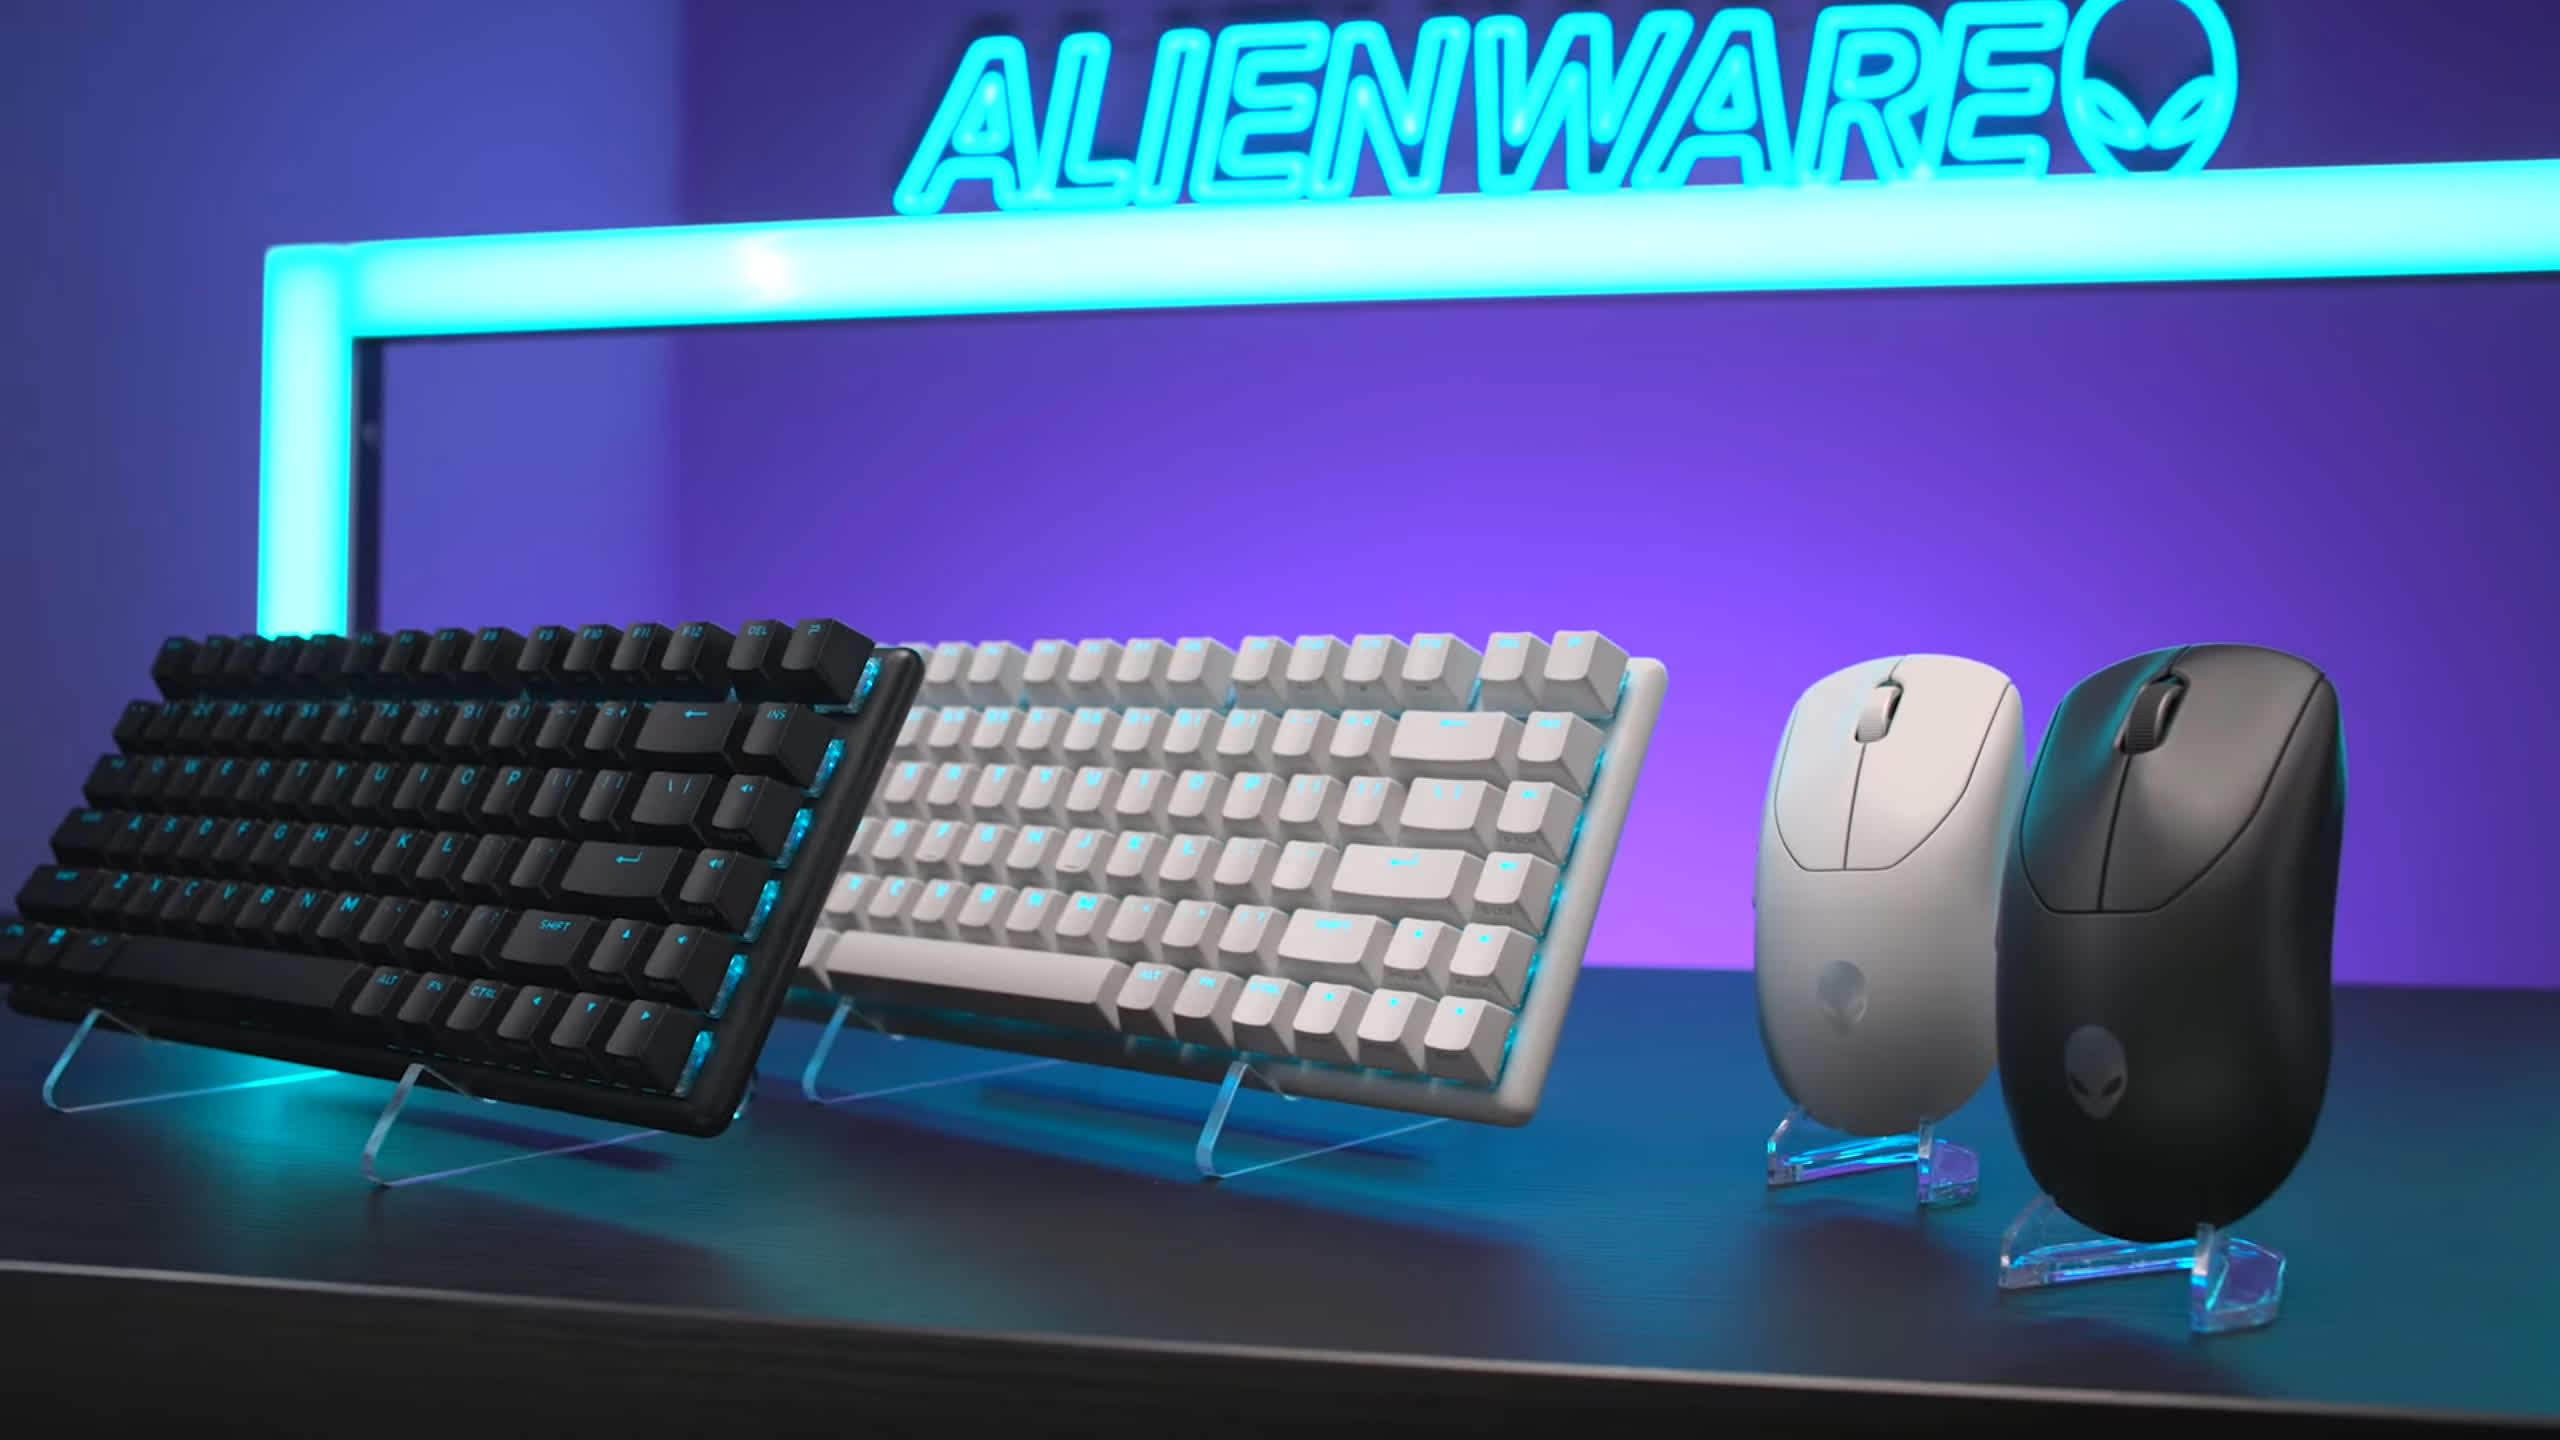 Alienware's Pro Wireless Mouse and Pro Wireless Keyboard peripherals are built for esports